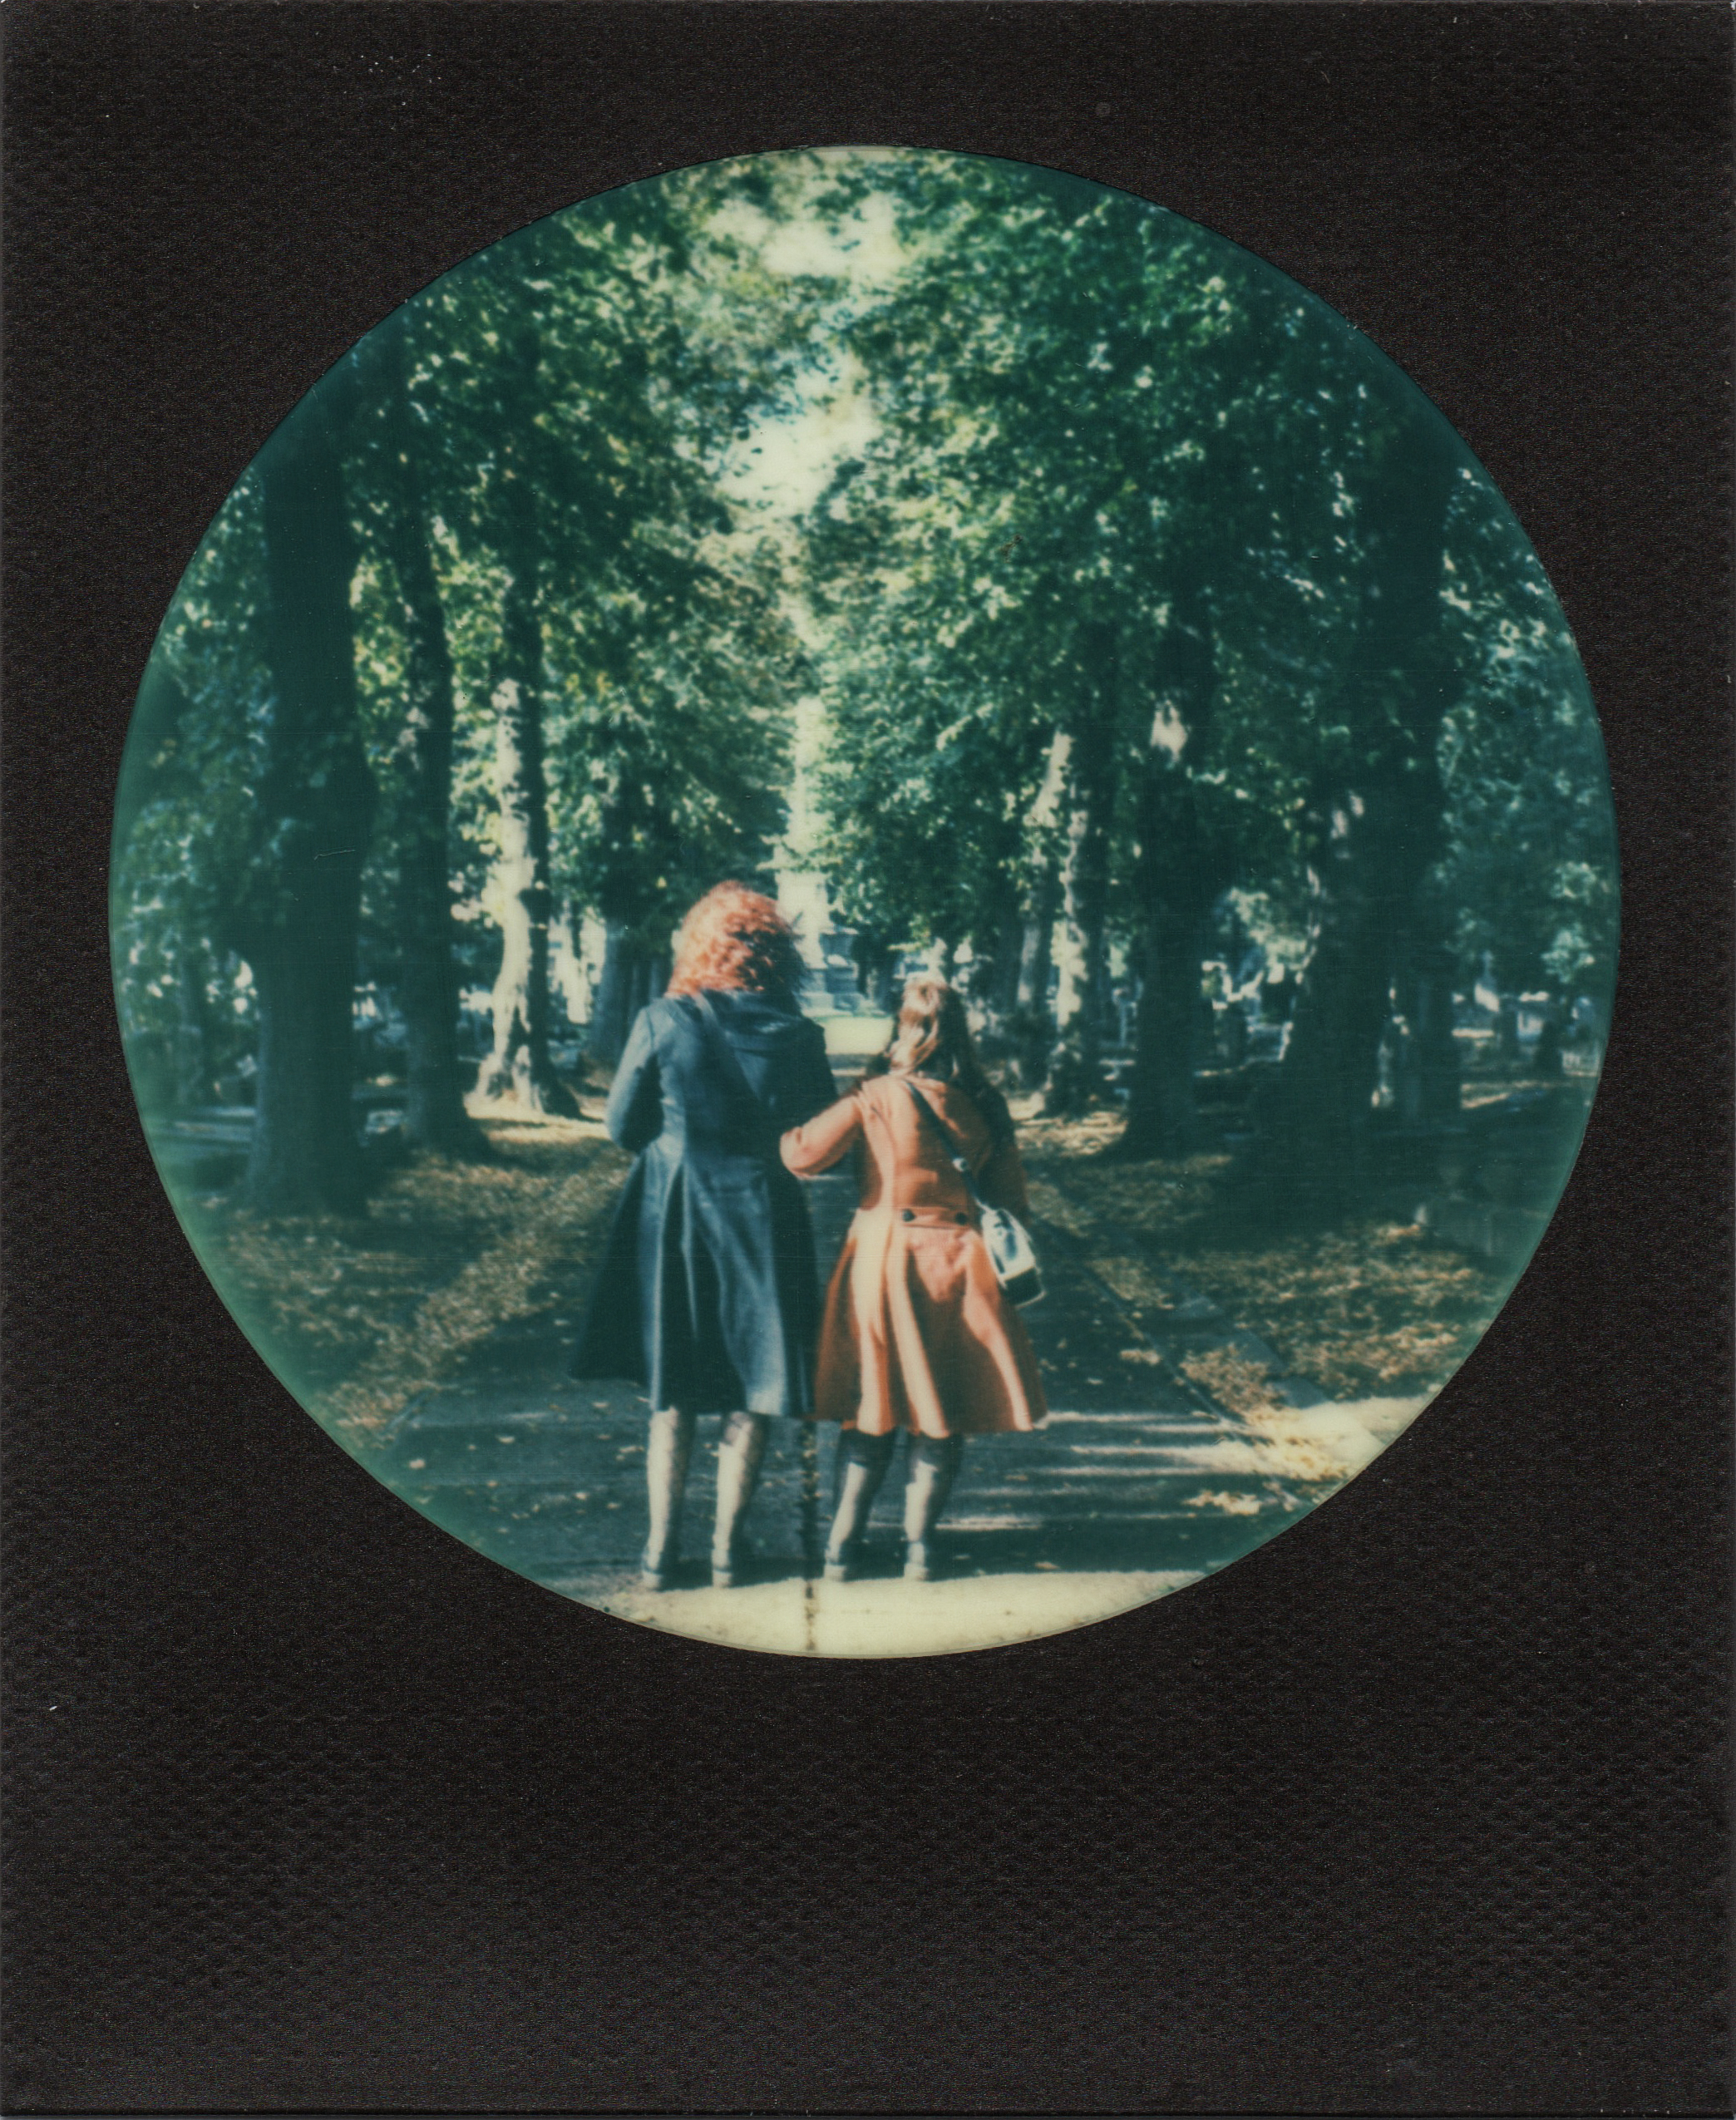 Romantic Walk in a Cemetary | Polaroid SX70 | Impossible Color | Karin Claus